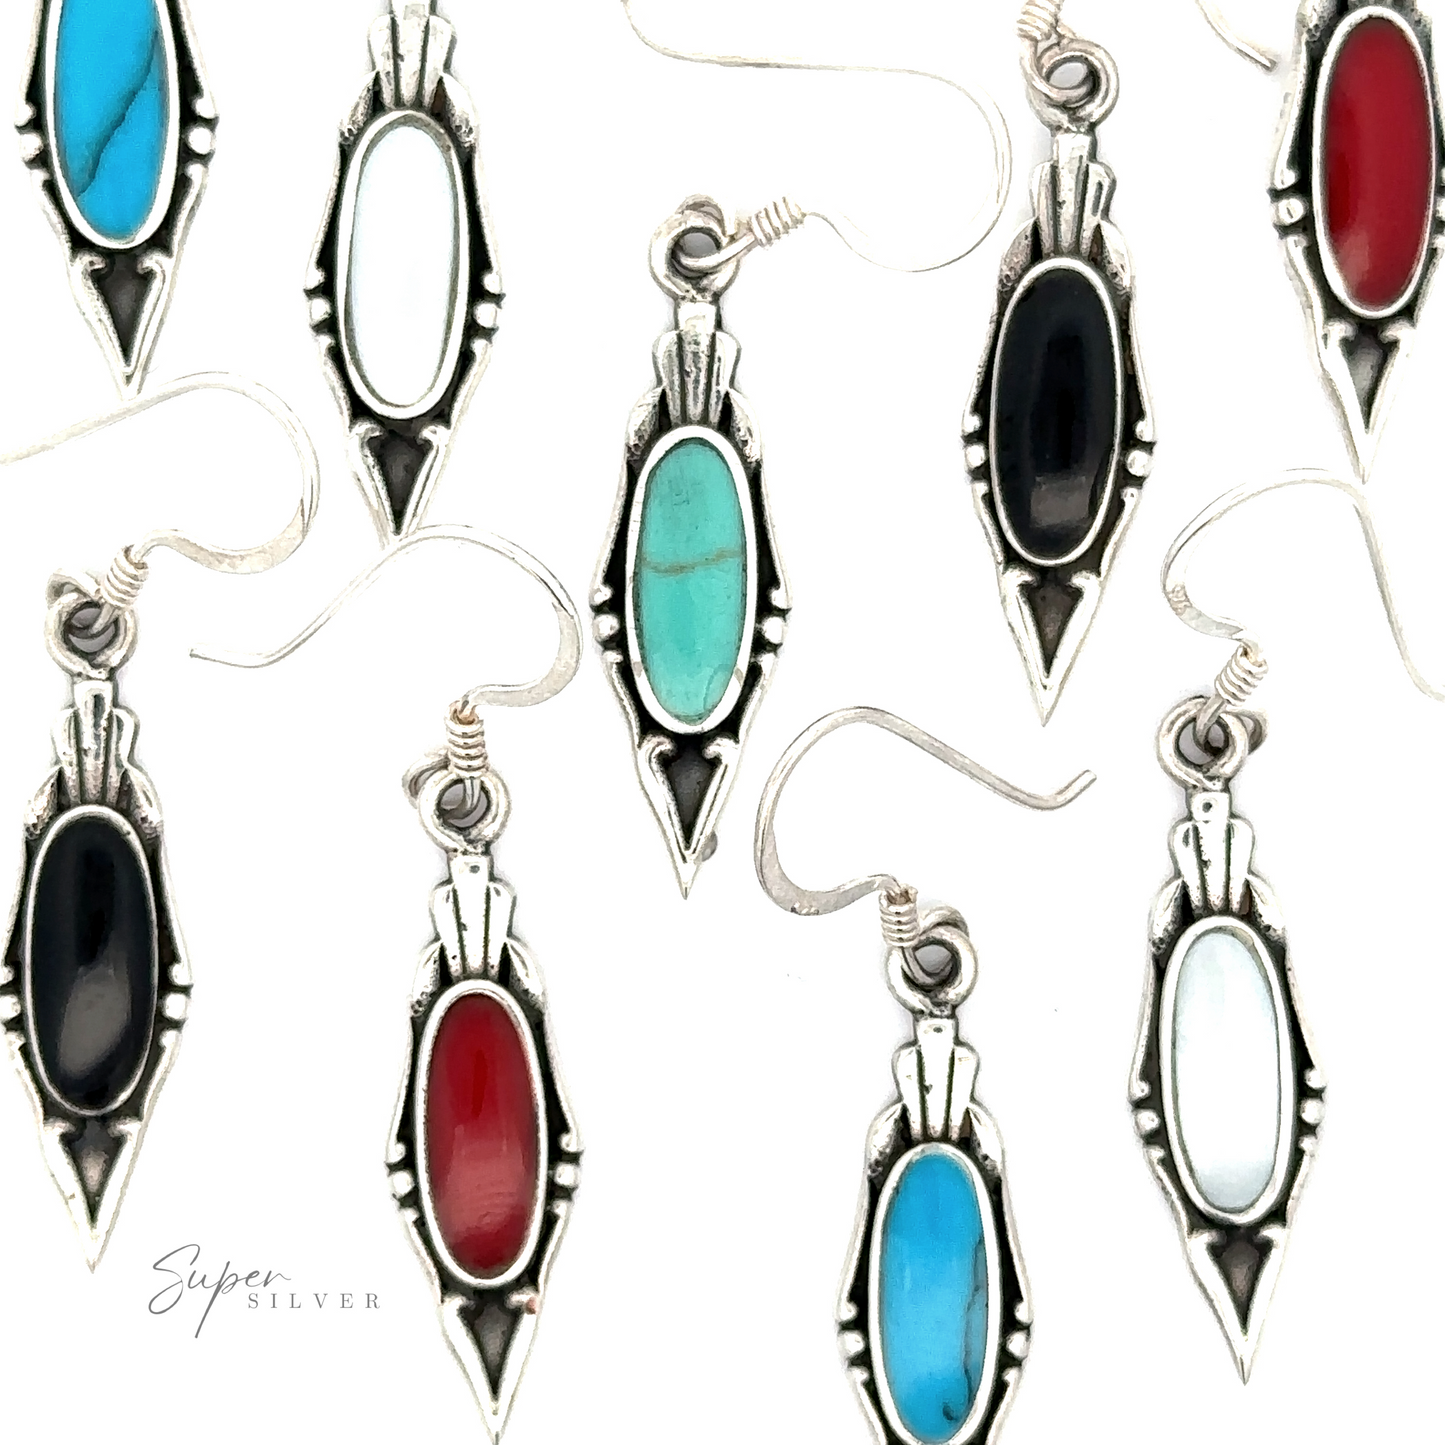 A collection of Elegant Inlaid Earrings with Oval Stone featuring differently colored oval stones, including red, turquoise, black, and white, displayed against a white background.